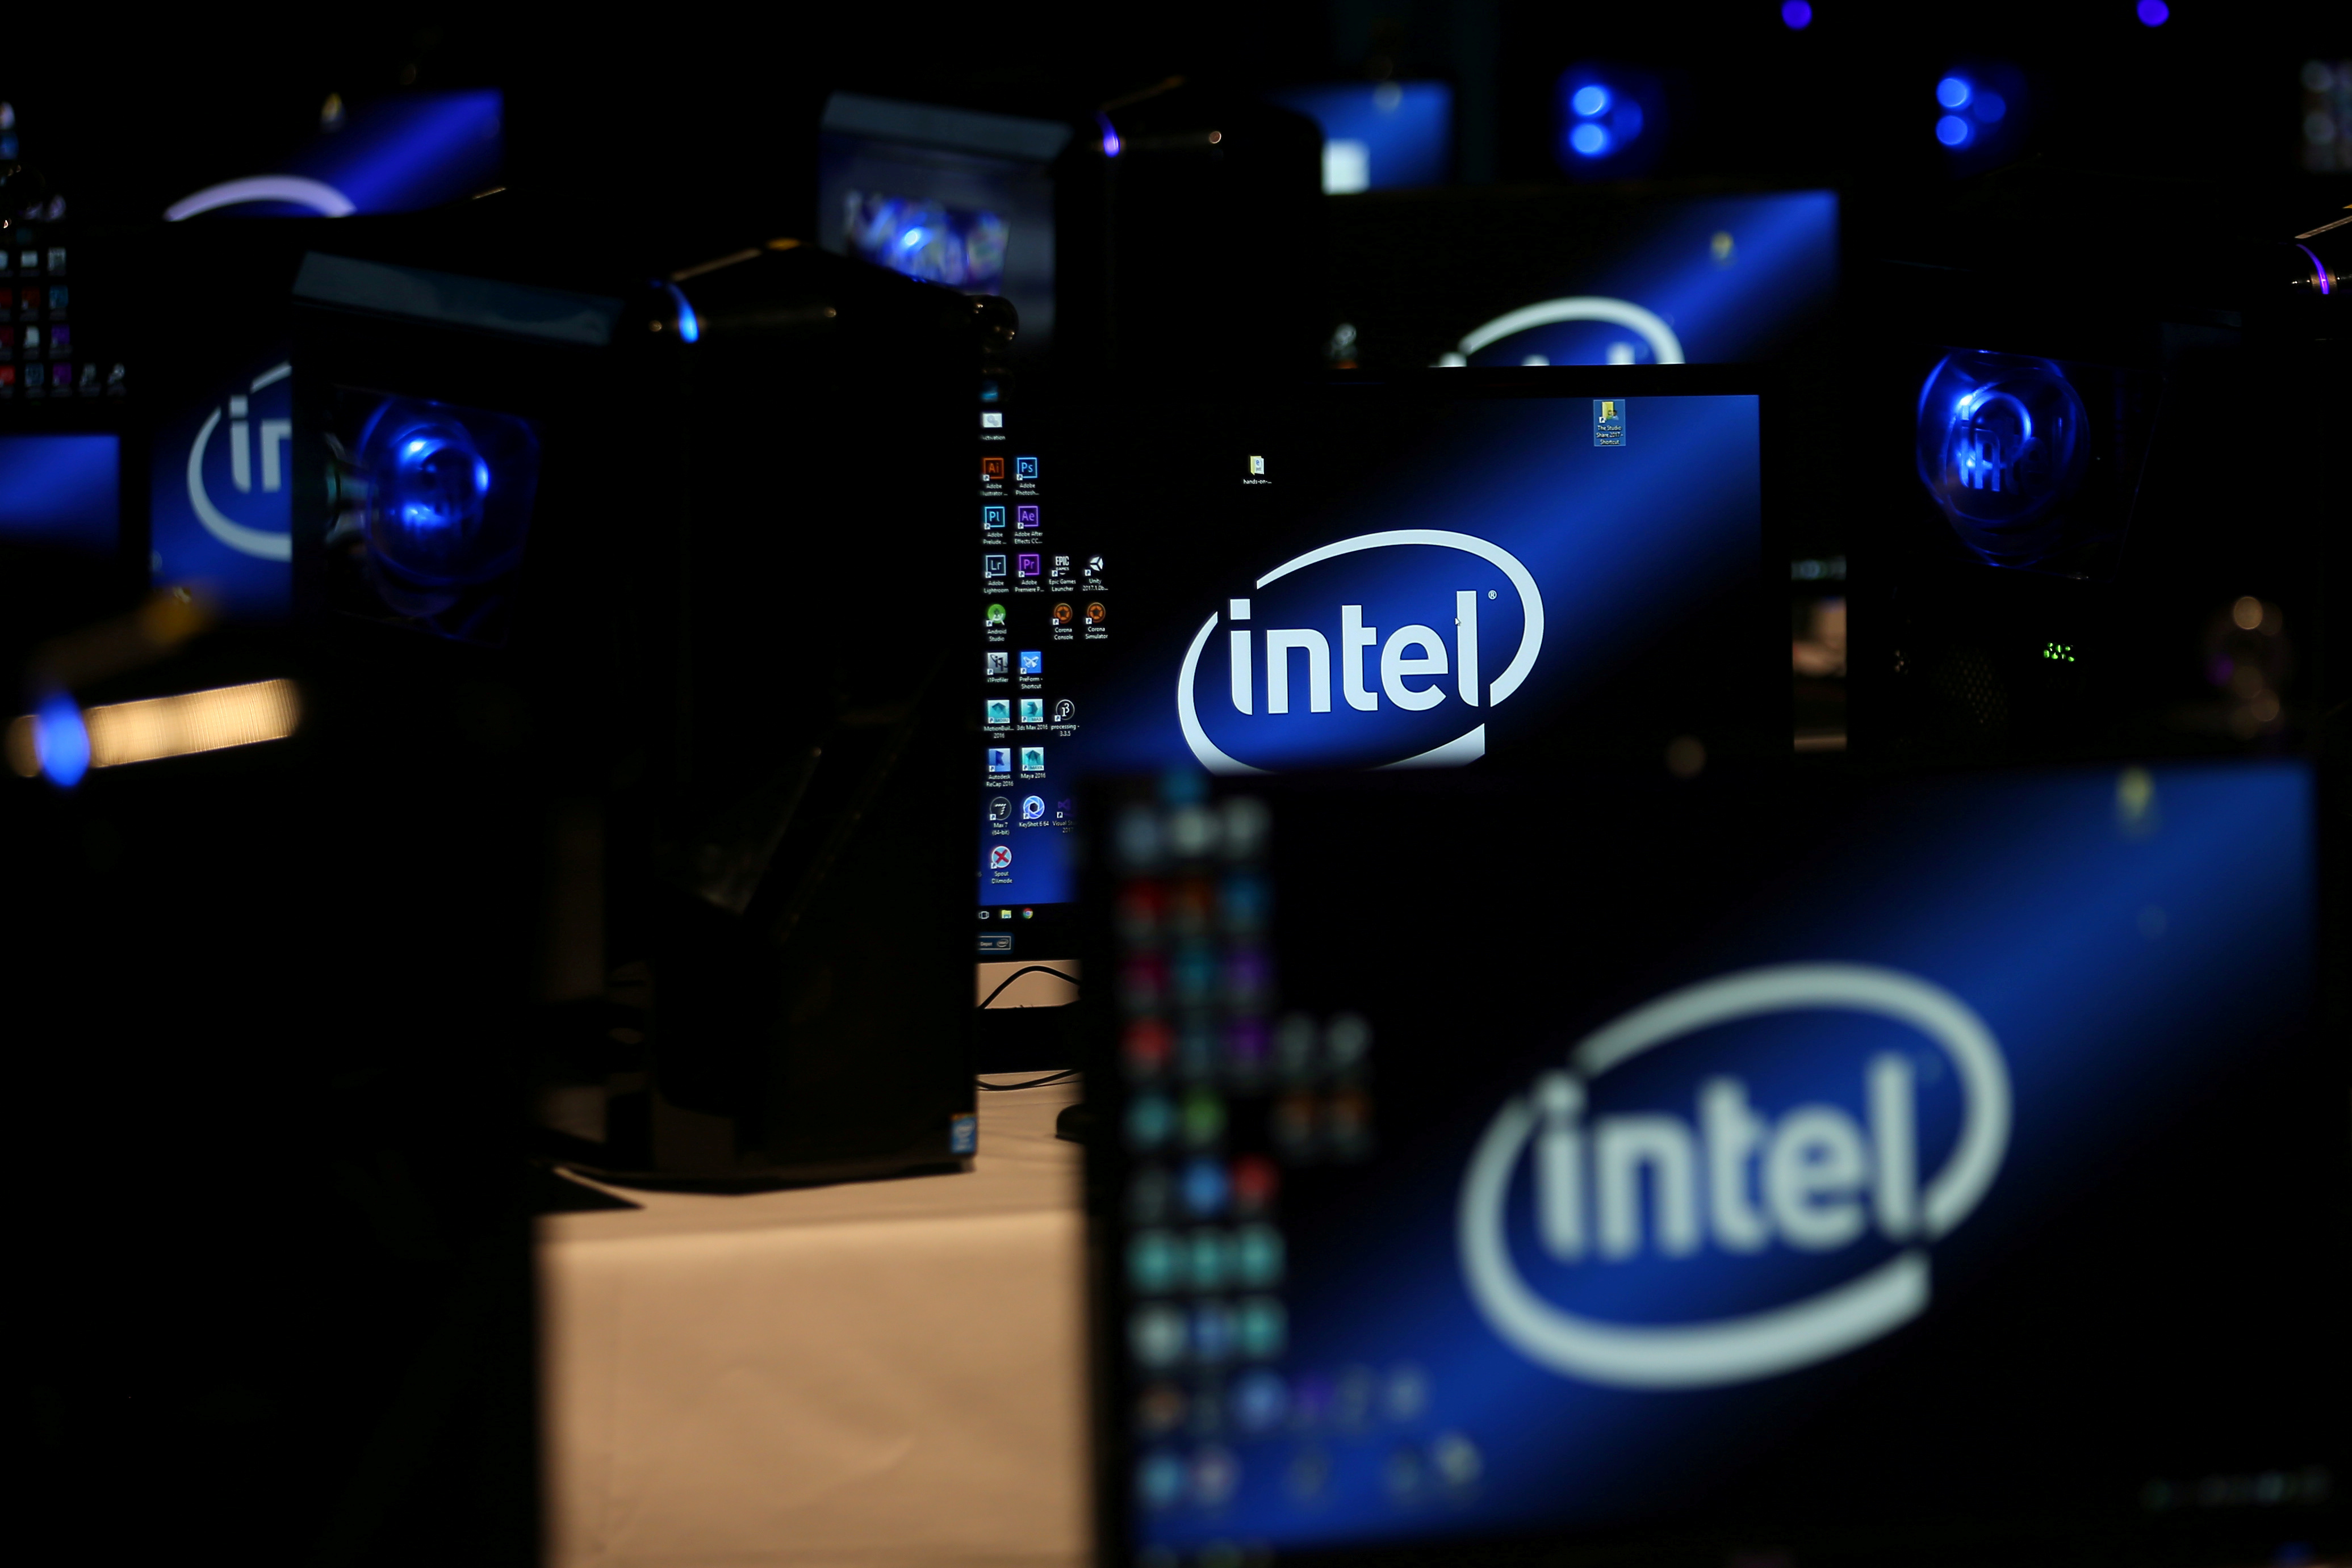 The Intel logo is displayed on computer screens